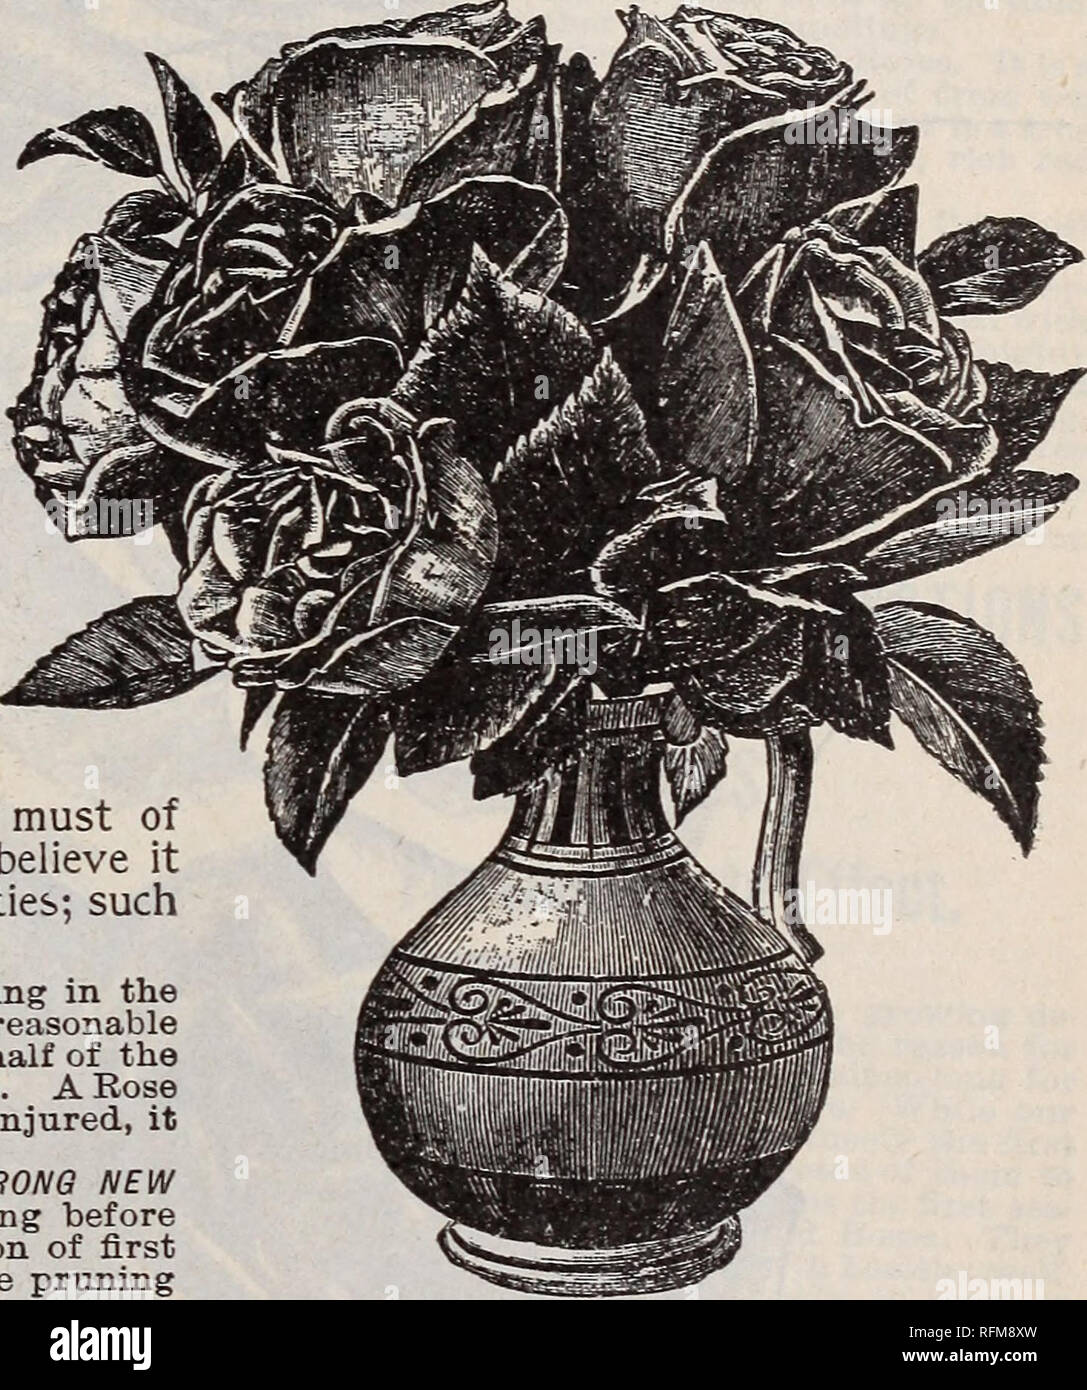 . The Geo. H. Mellen Co. : 1899. Nursery stock Ohio Catalogs; Bulbs (Plants) Catalogs; Flowers Seeds Catalogs; Plants, Ornamental Catalogs; Fruit Catalogs. 1^ ^ $ $ ^ ^ S GOLD among the precious metals, and as the diamond compared with other gems, so is the Rose in its supremacy of loveliness among the flowers. Poets of all ages ^ have sung of its regent beauty, and by universal consent it has been crowned Queen ' of the Floral Kingdom. Roses are the fit adornment of happy homes. They are alike the solace of the lowly and the delight of the affluent. Among all classes and conditions of peopl Stock Photo